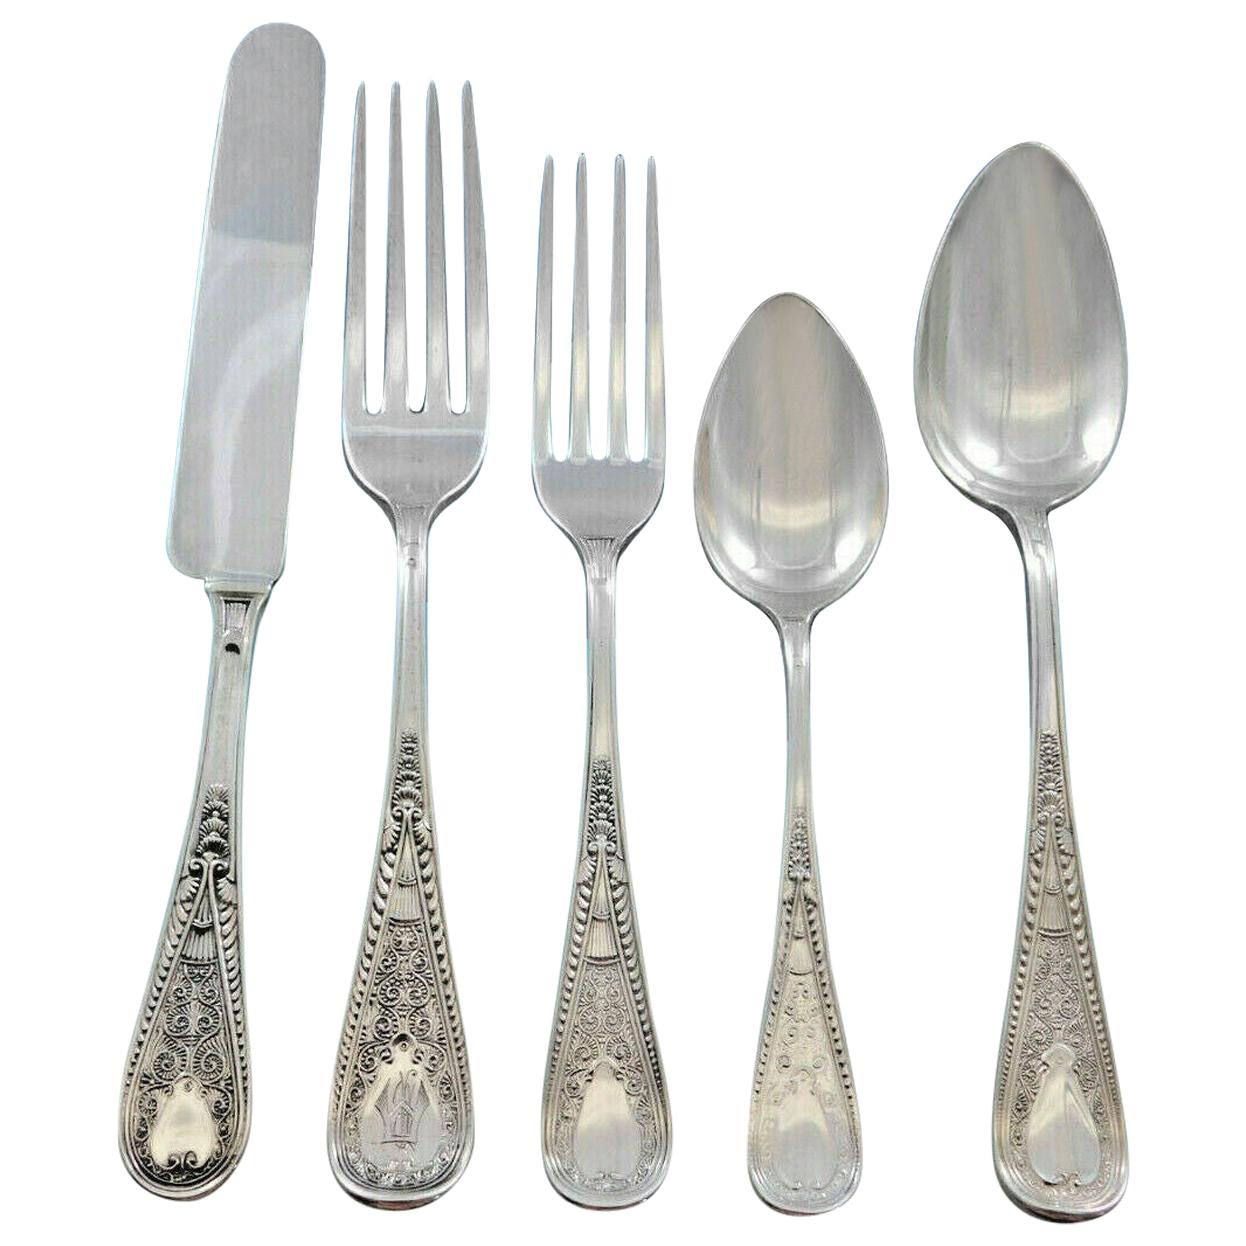 Hindostanee by Gorham Sterling Silver Flatware Set Service 66 pieces Persian